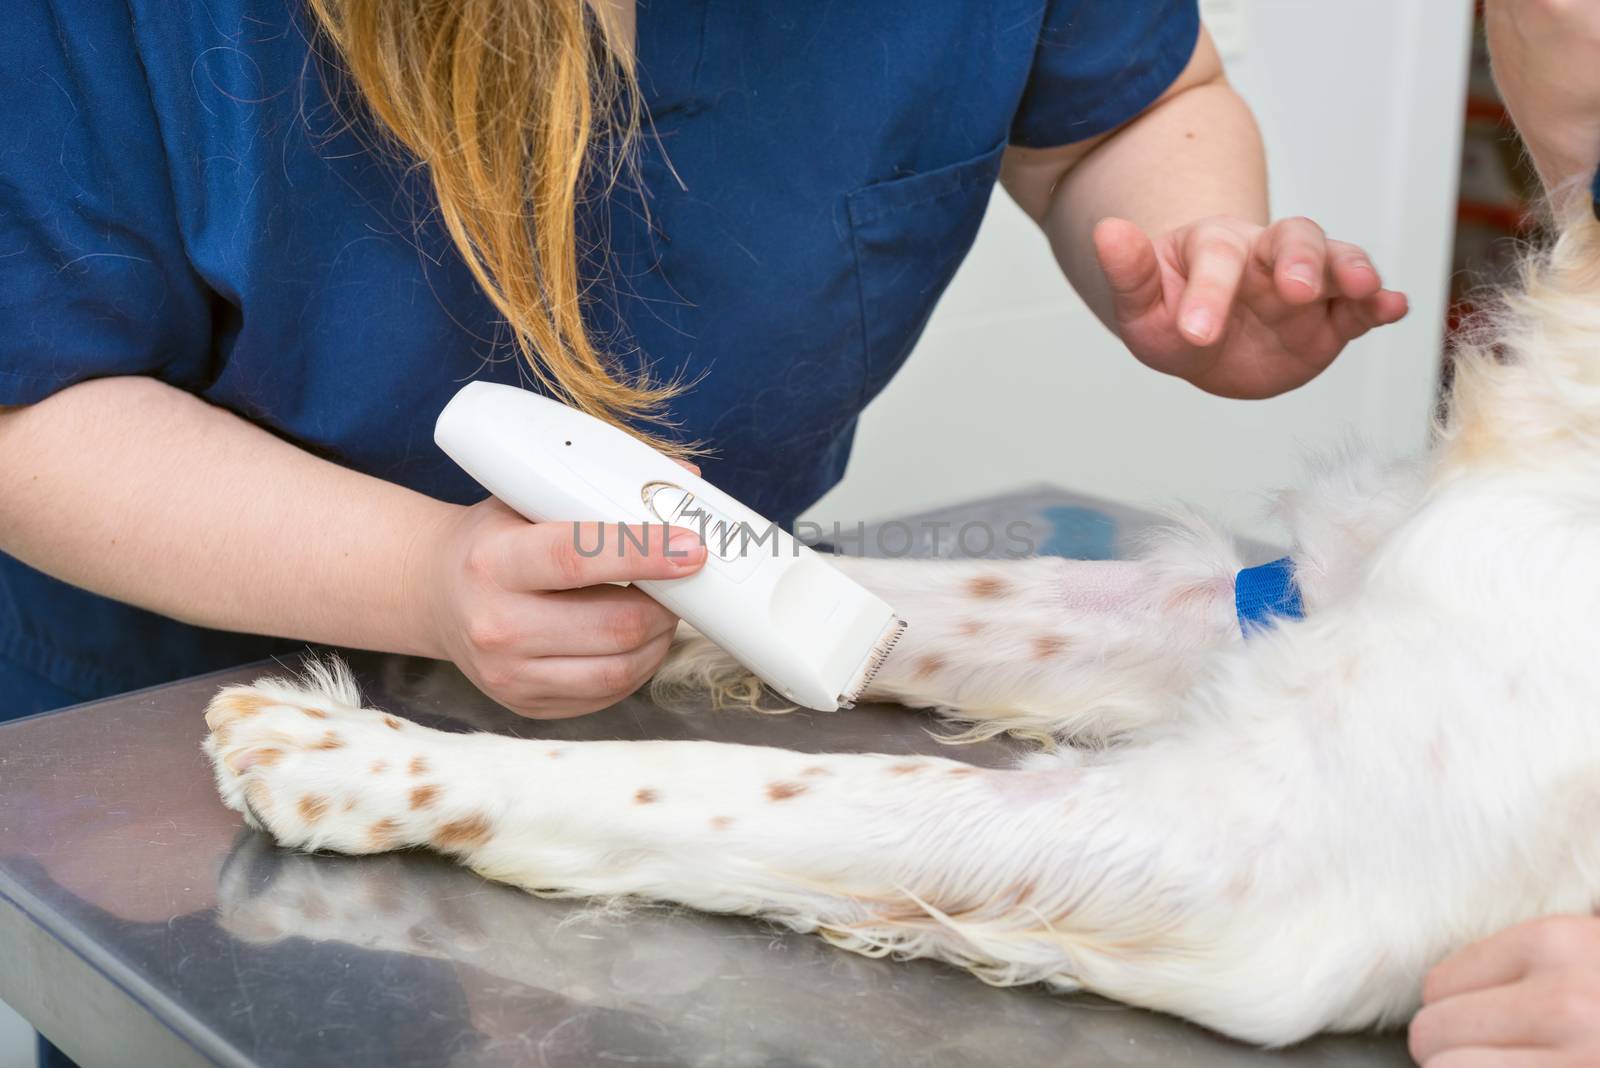 veterinarian shaving a dog for surgery. close up